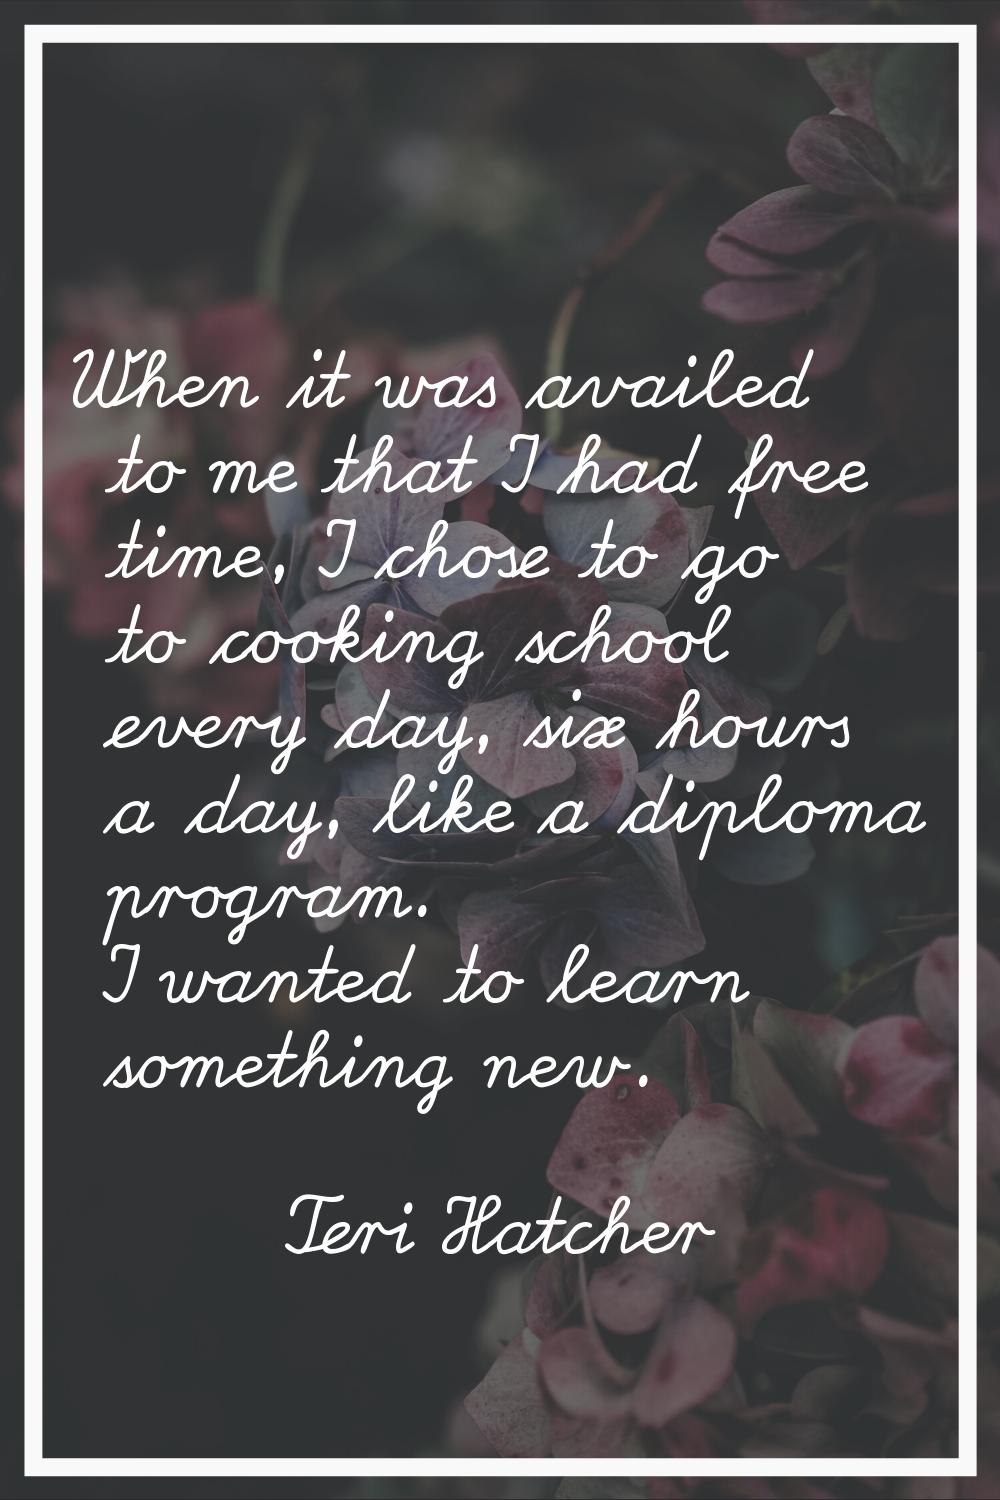 When it was availed to me that I had free time, I chose to go to cooking school every day, six hour